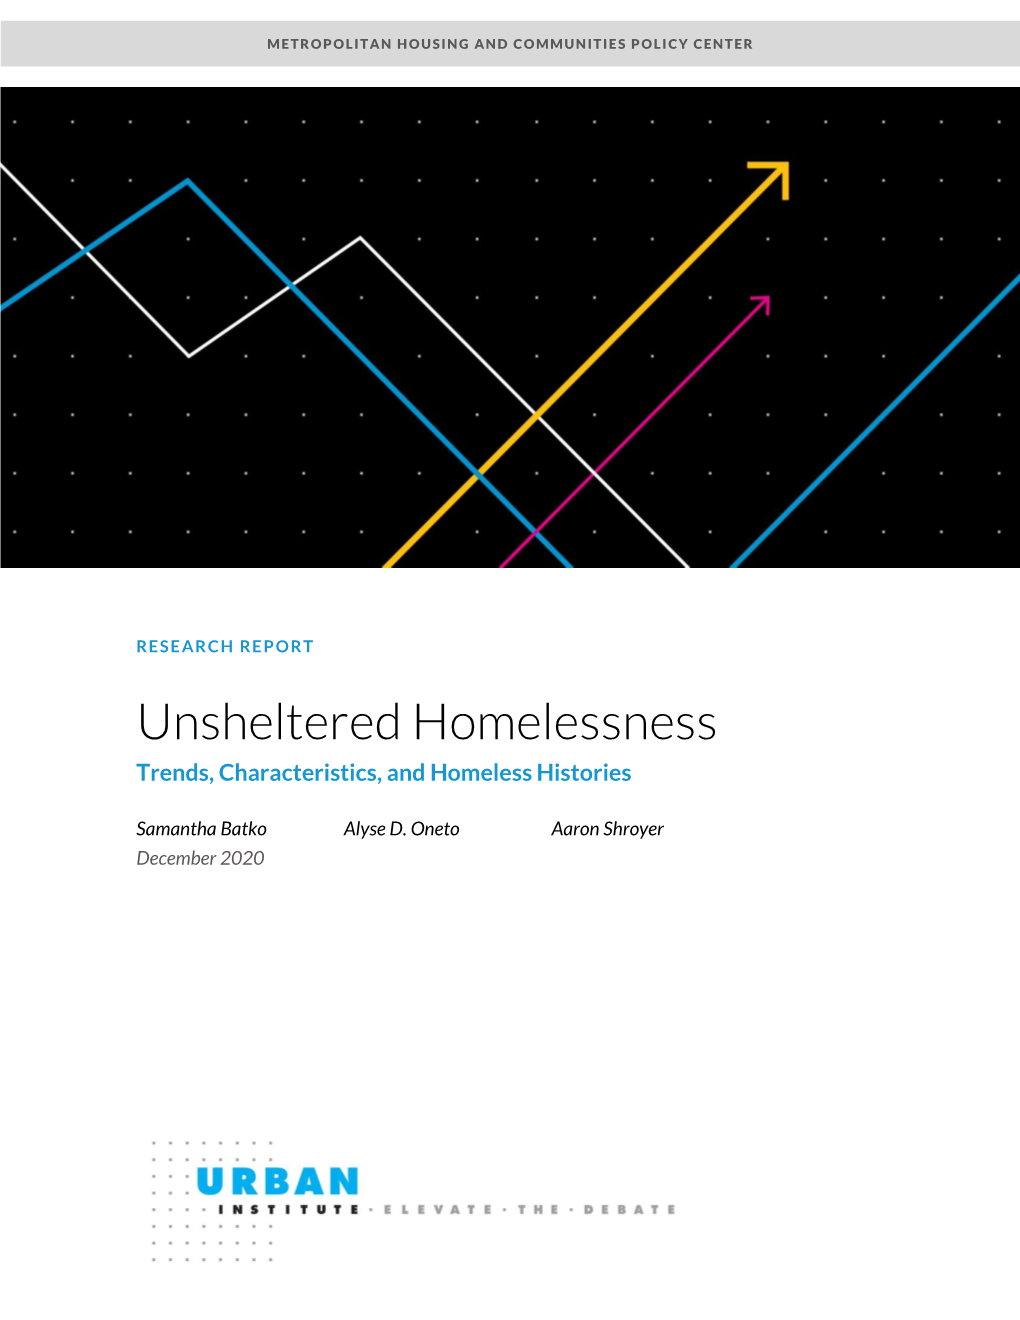 Unsheltered Homelessness Trends, Characteristics, and Homeless Histories